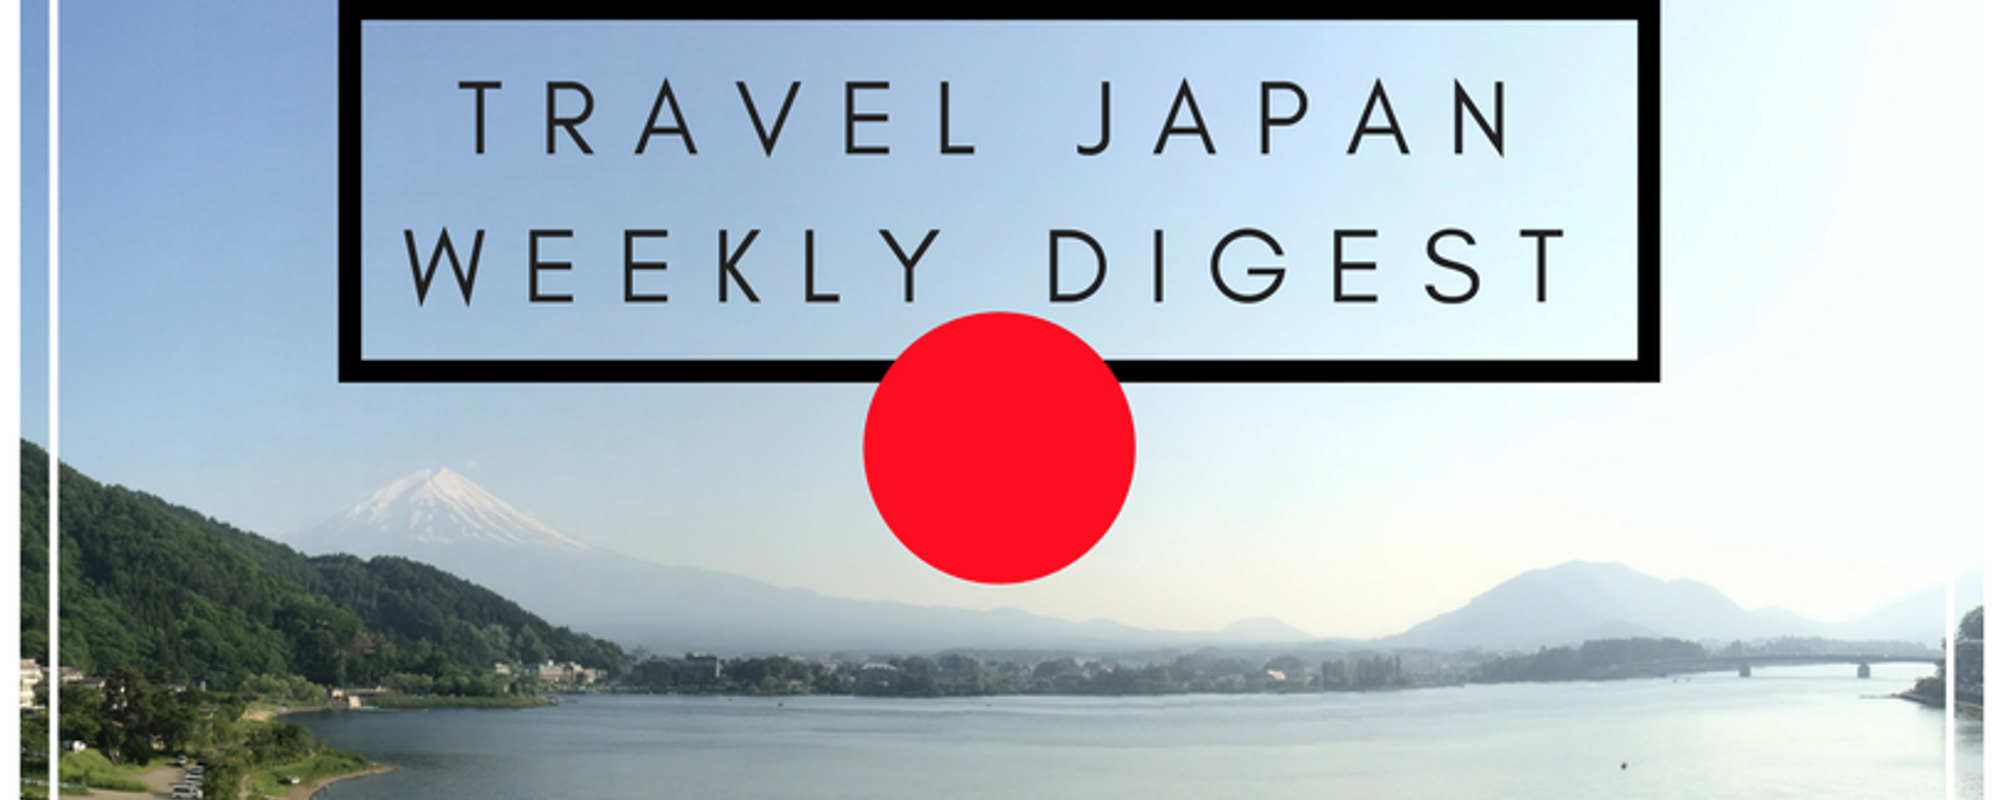 Travel Japan Weekly Digest - Second Edition - Week #2 - Featuring amazing posts from 16 authors this week